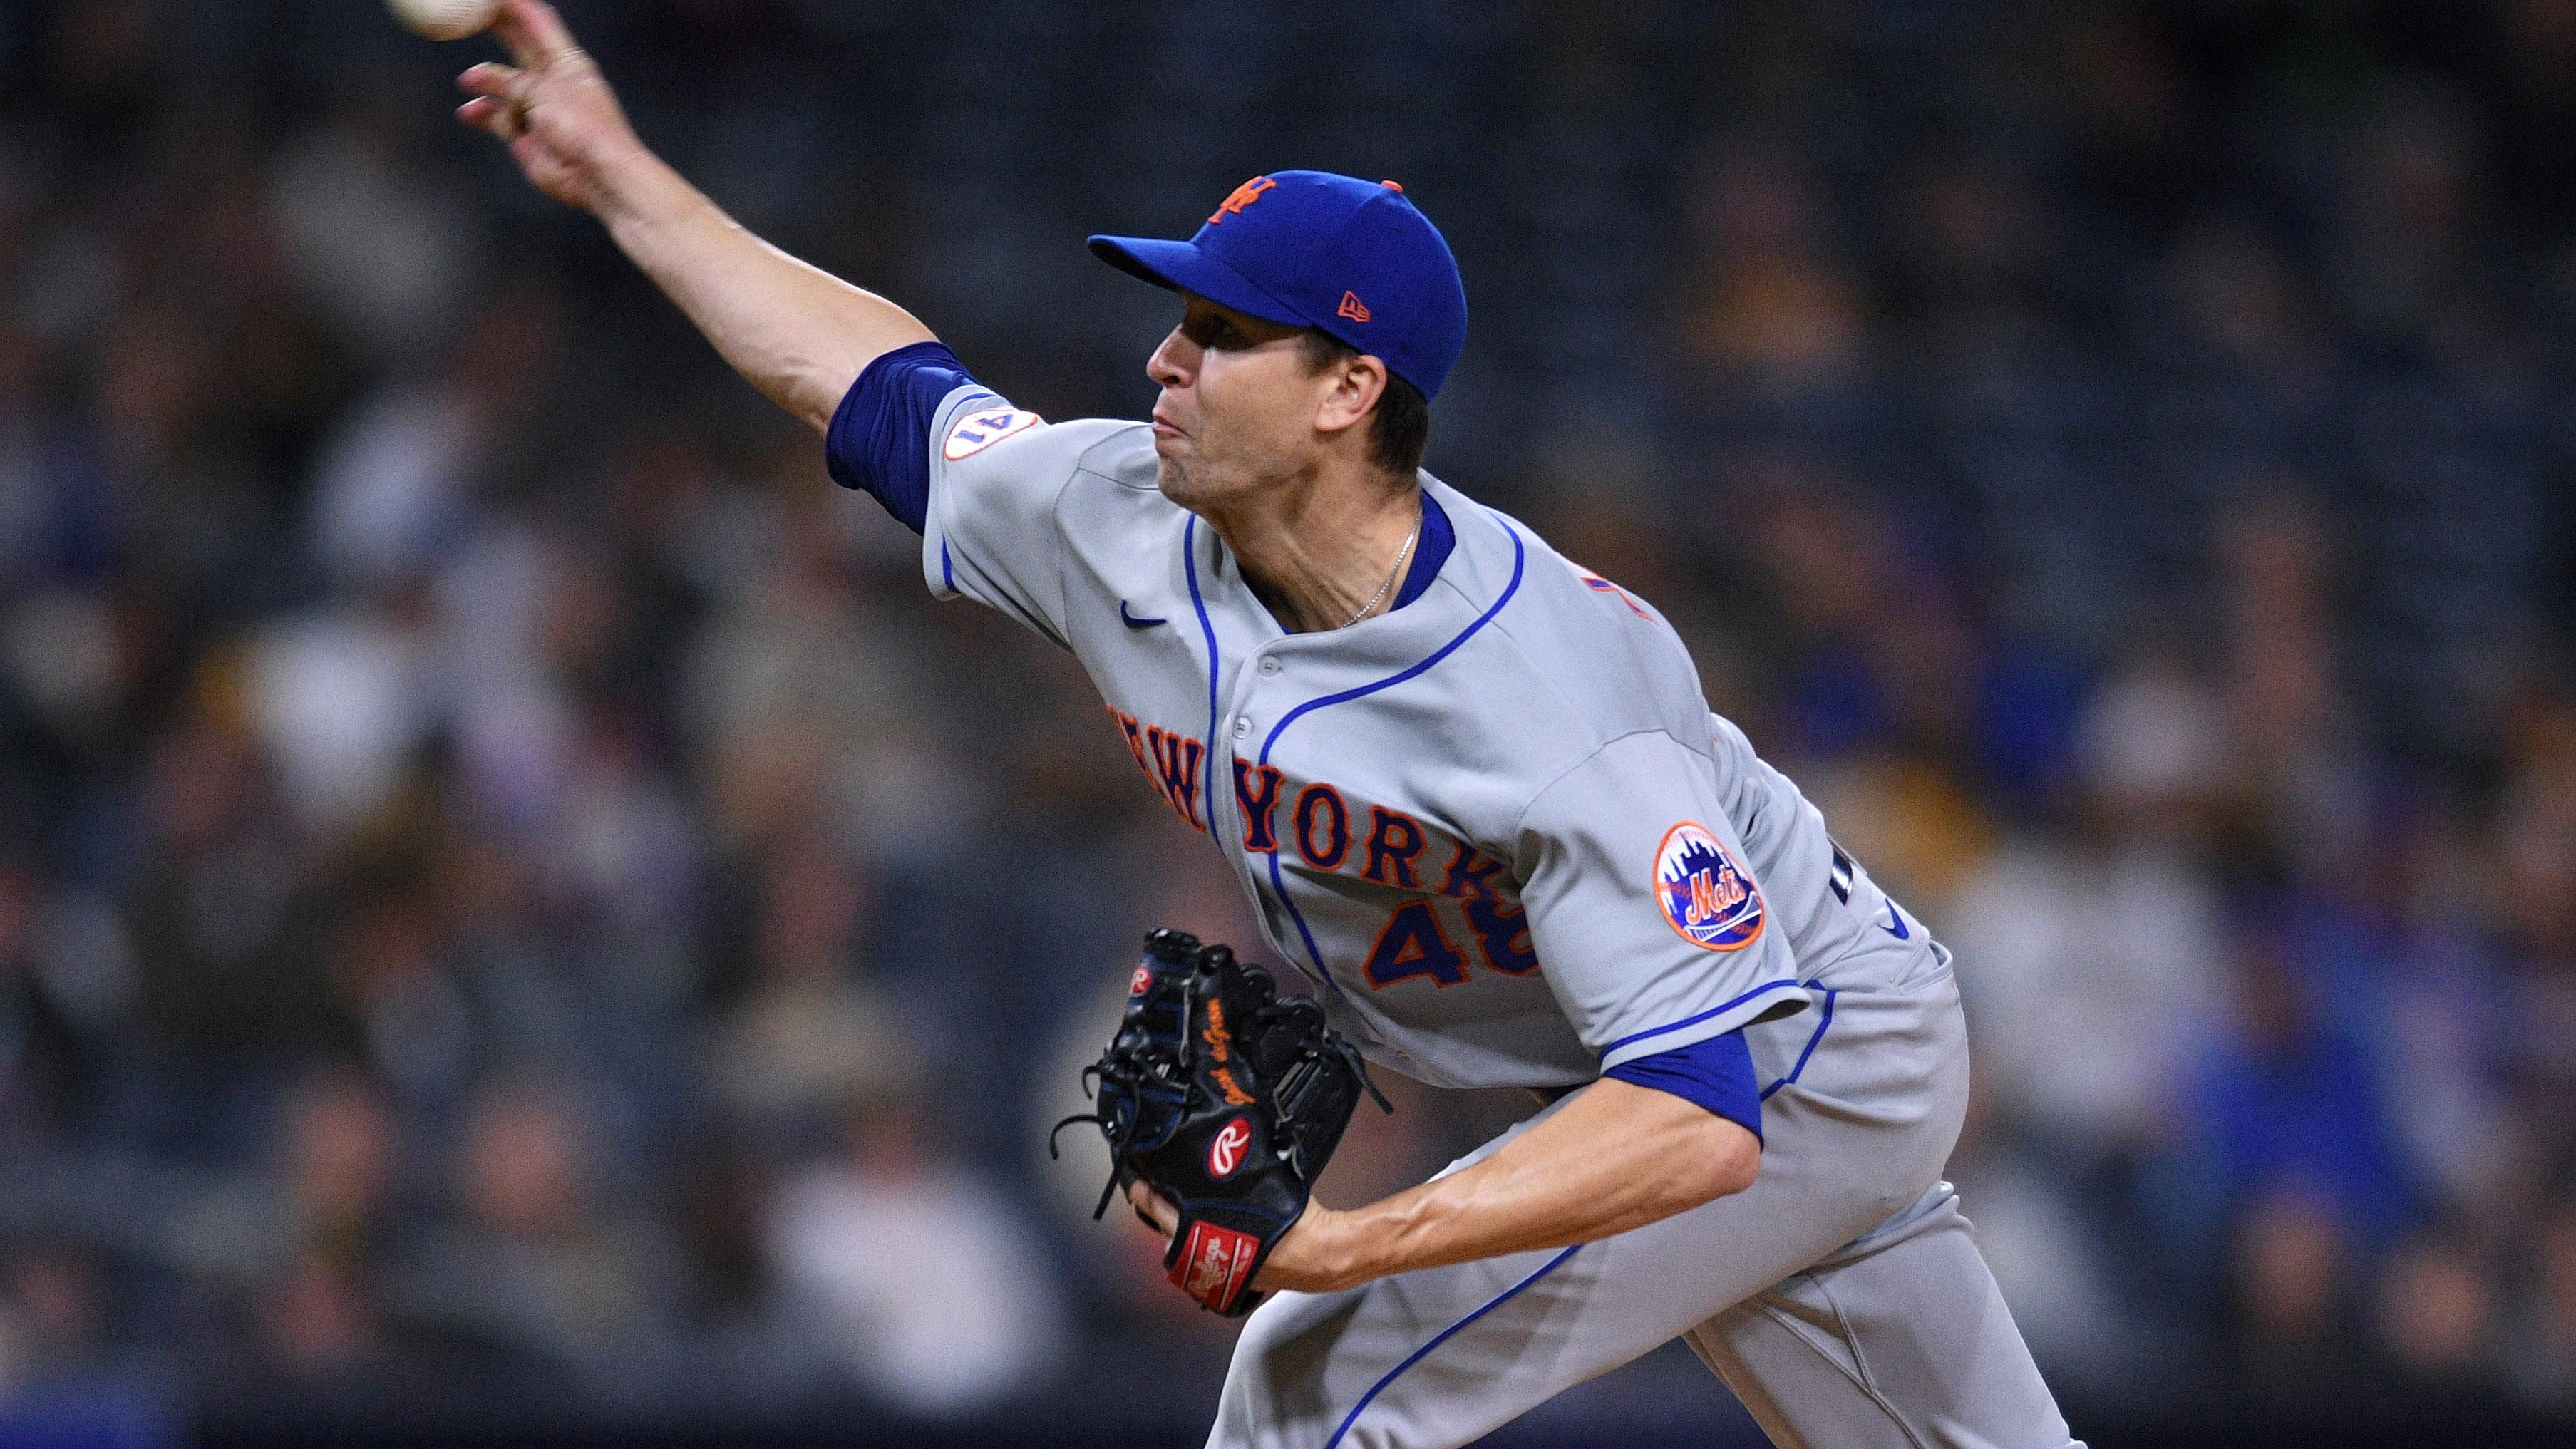 New York Mets starting pitcher Jacob deGrom (48) throws a pitch against the San Diego Padres during the sixth inning at Petco Park. / Orlando Ramirez-USA TODAY Sports